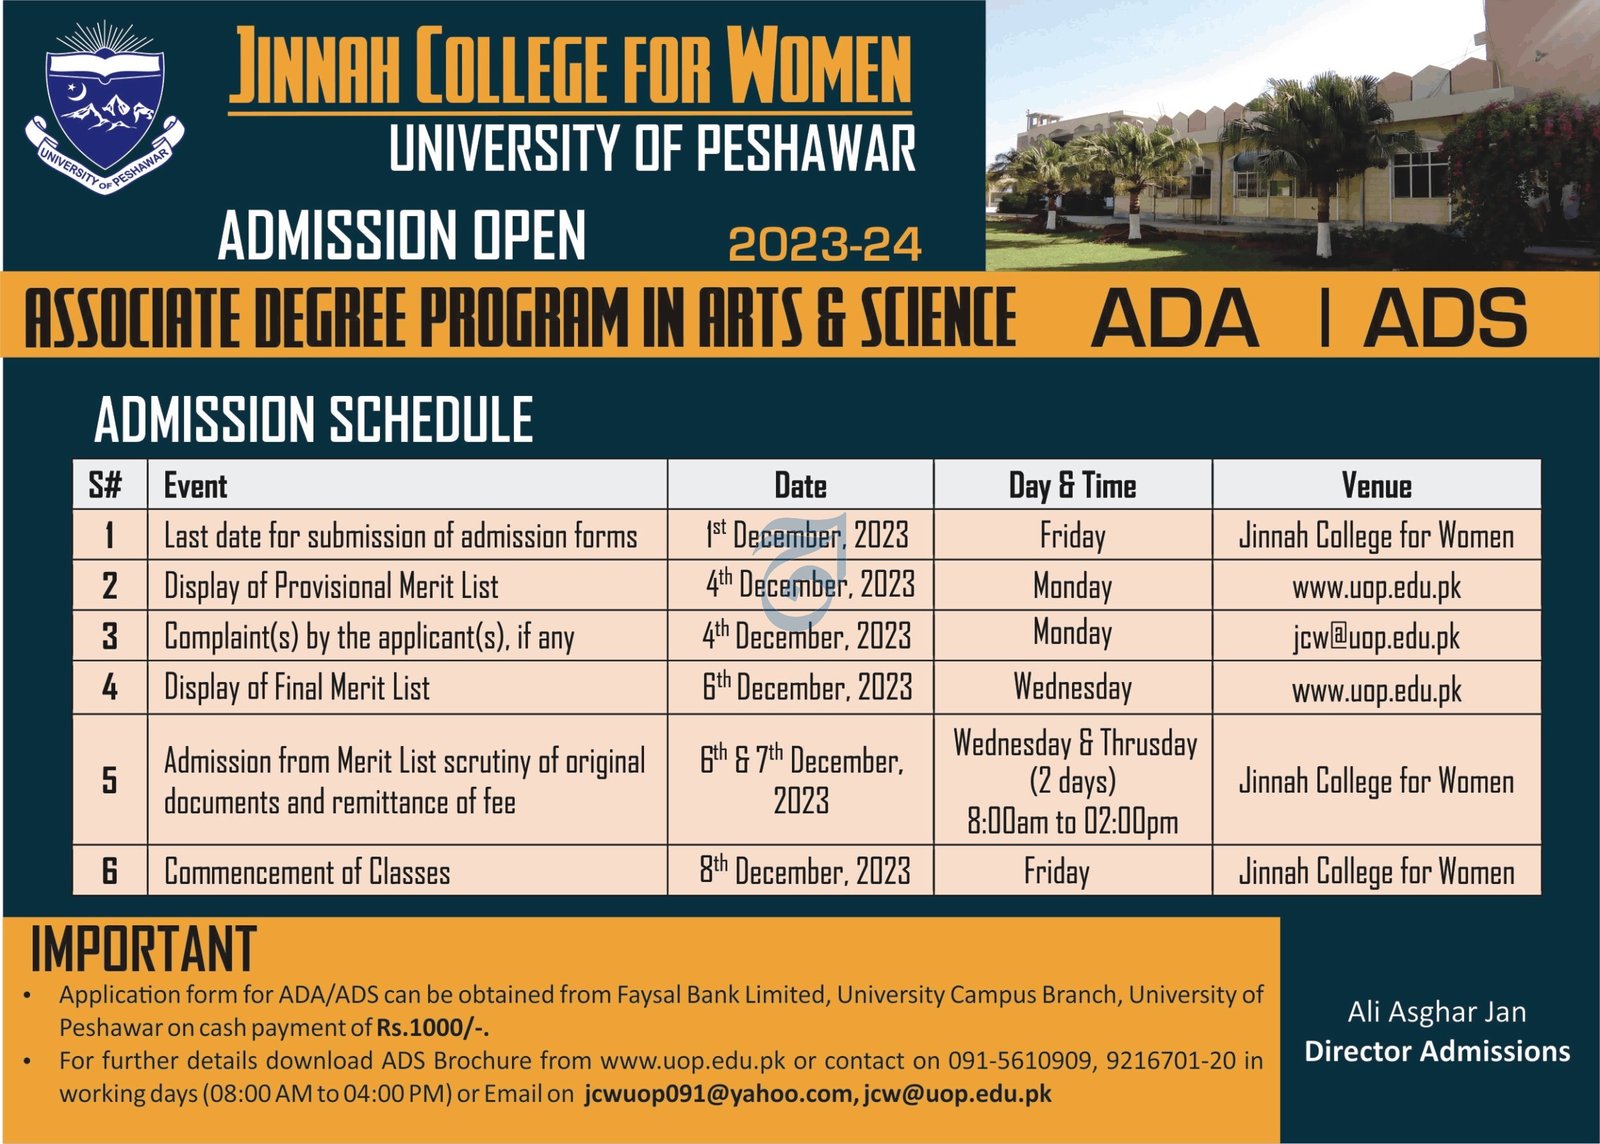 Admissiosn Open Jinnah College for Women 2023-24